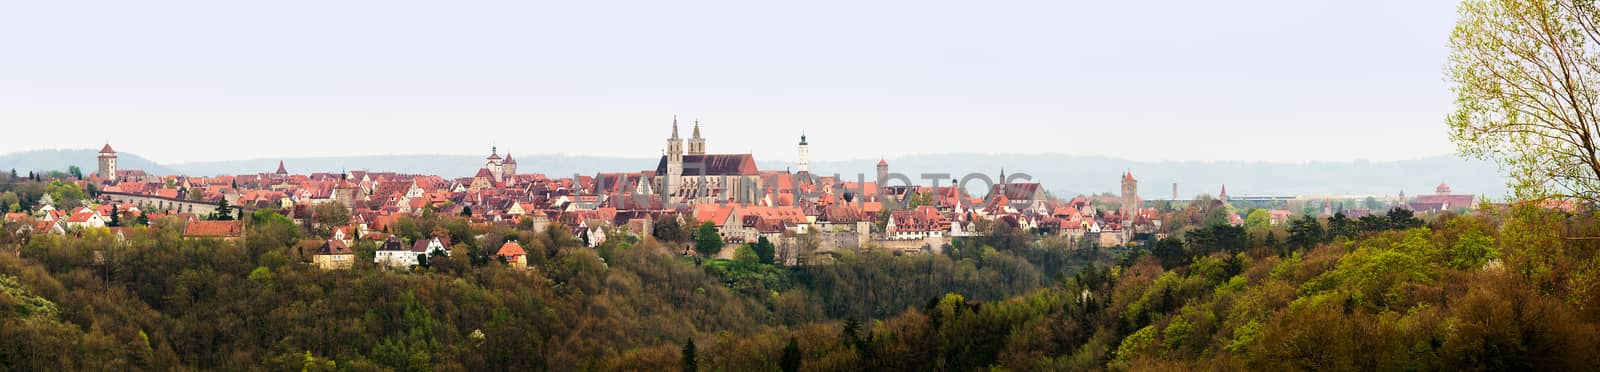 Broad panorama of Rothenburg ob der Tauber by steheap